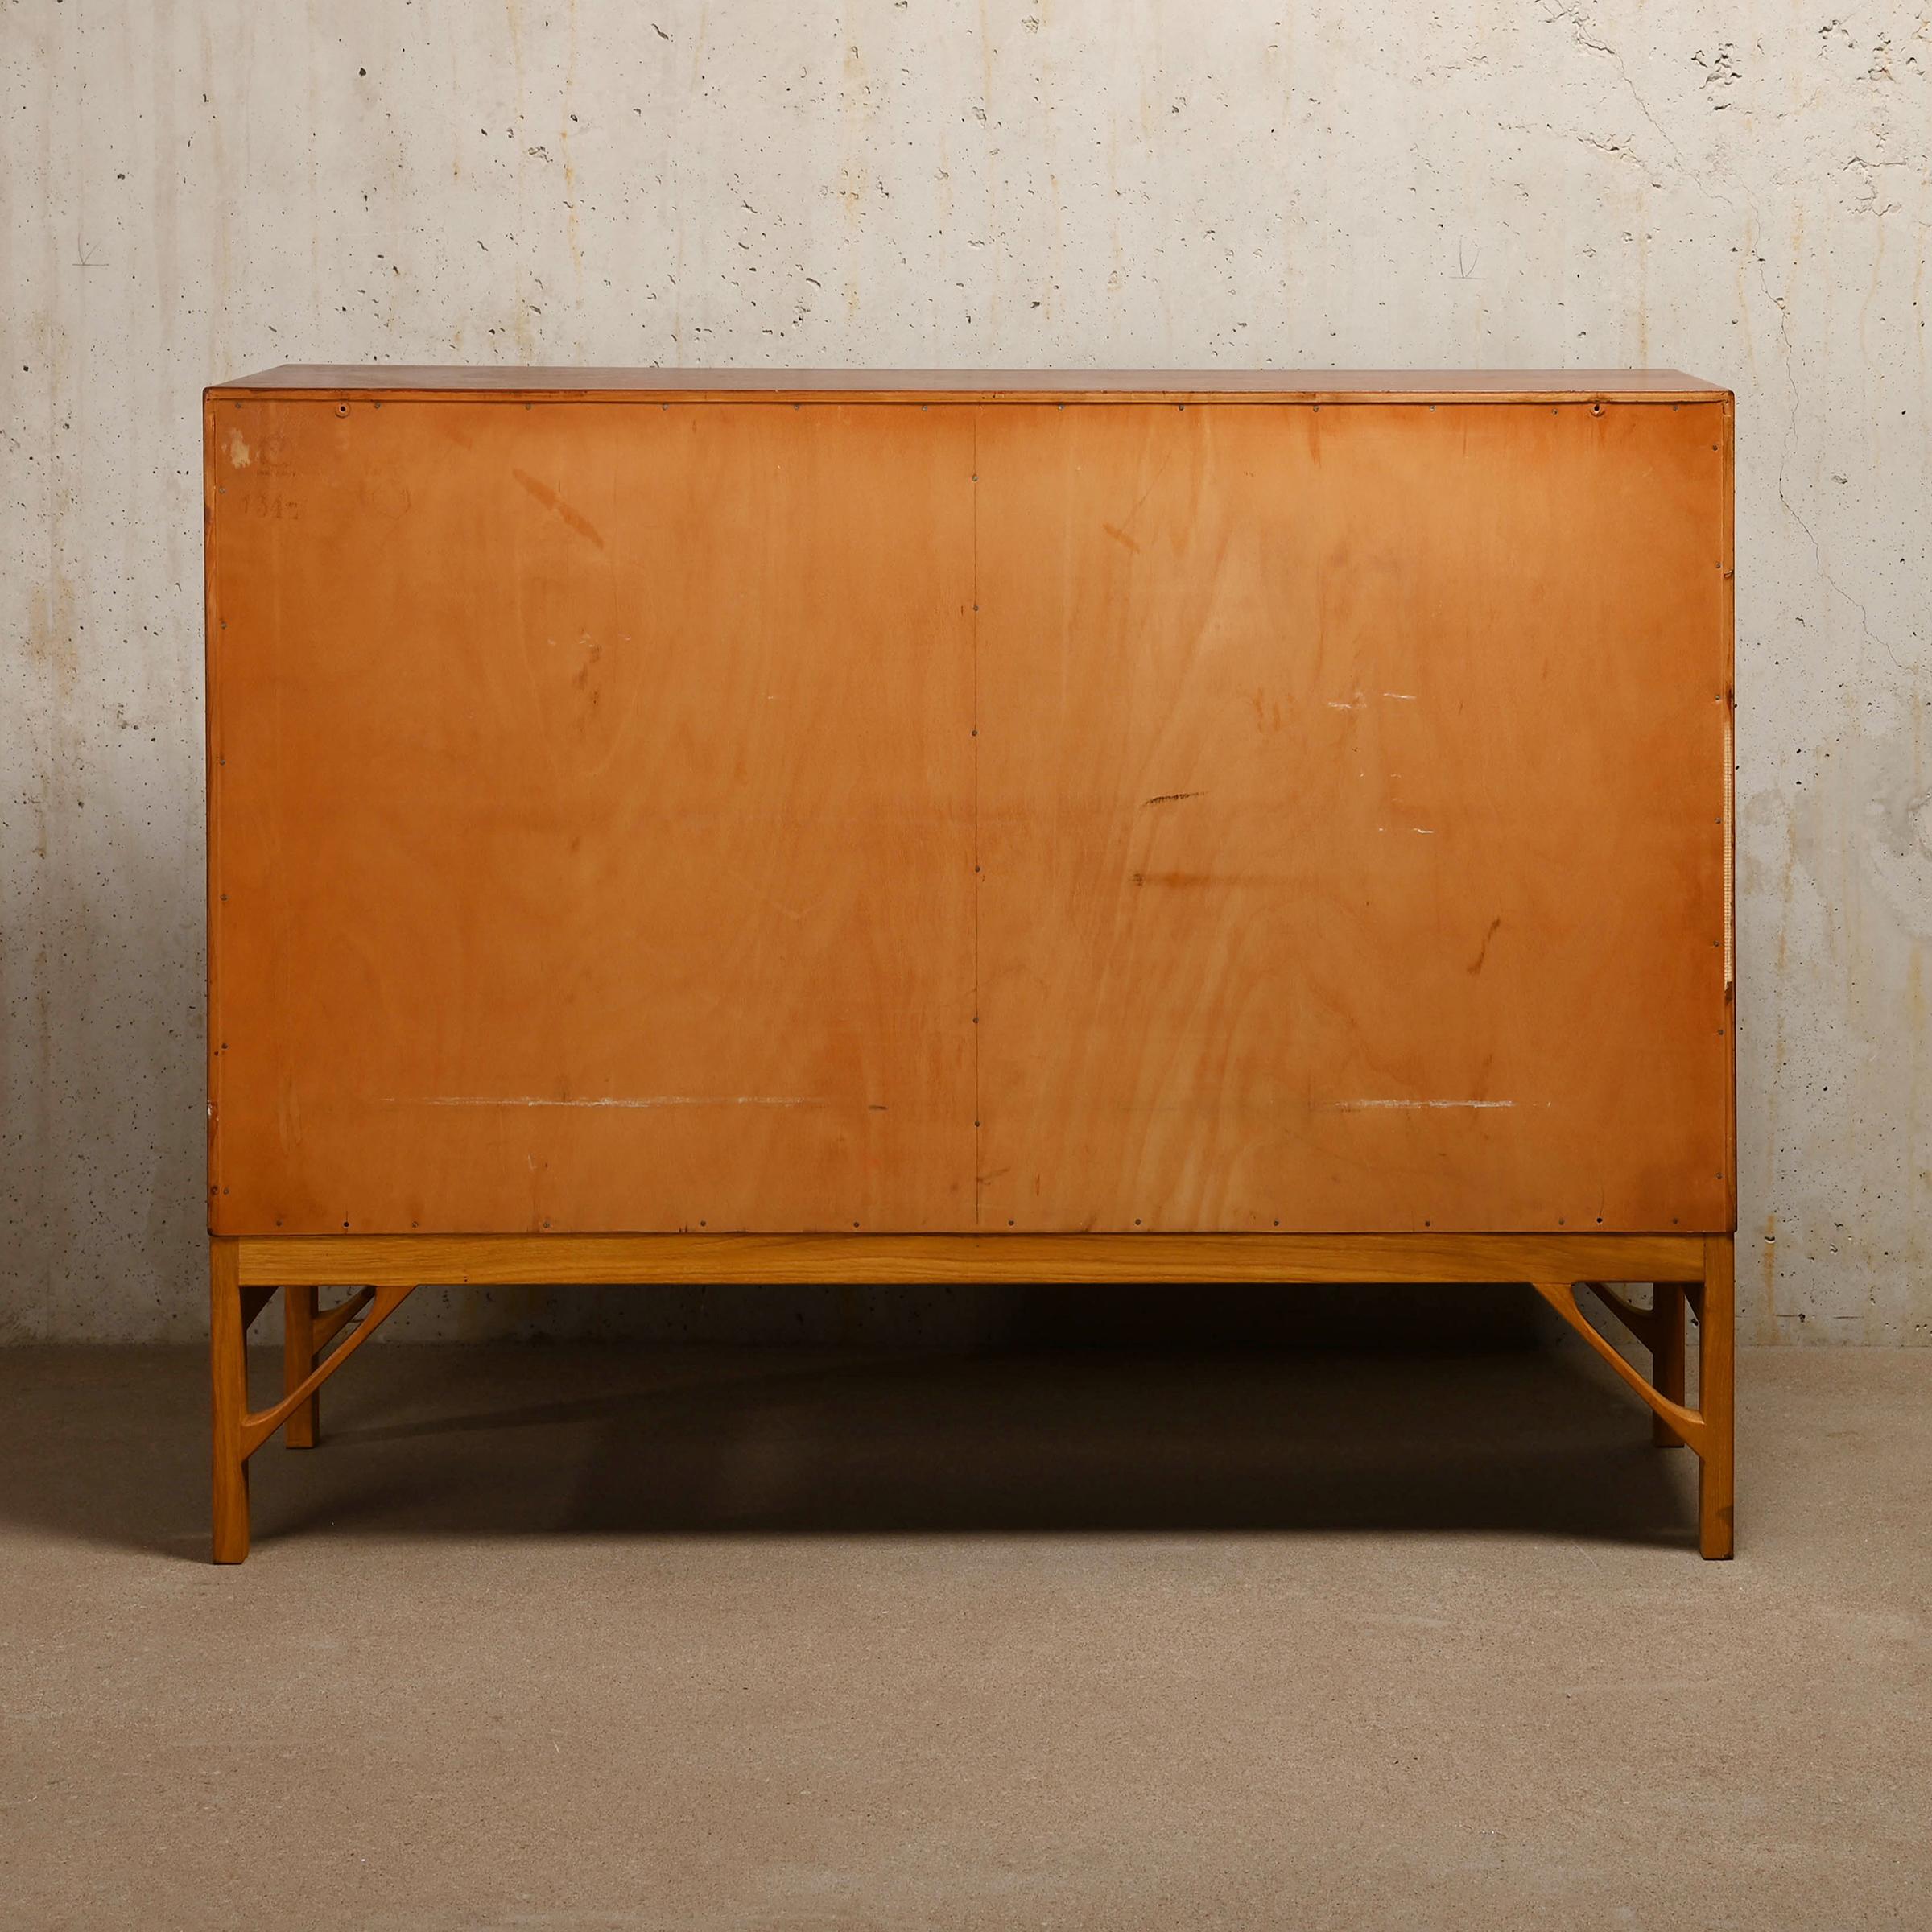 Mid-20th Century Børge Mogensen Oak and Teak Chest of Drawers by C.M. Madsen for FDB Møbler